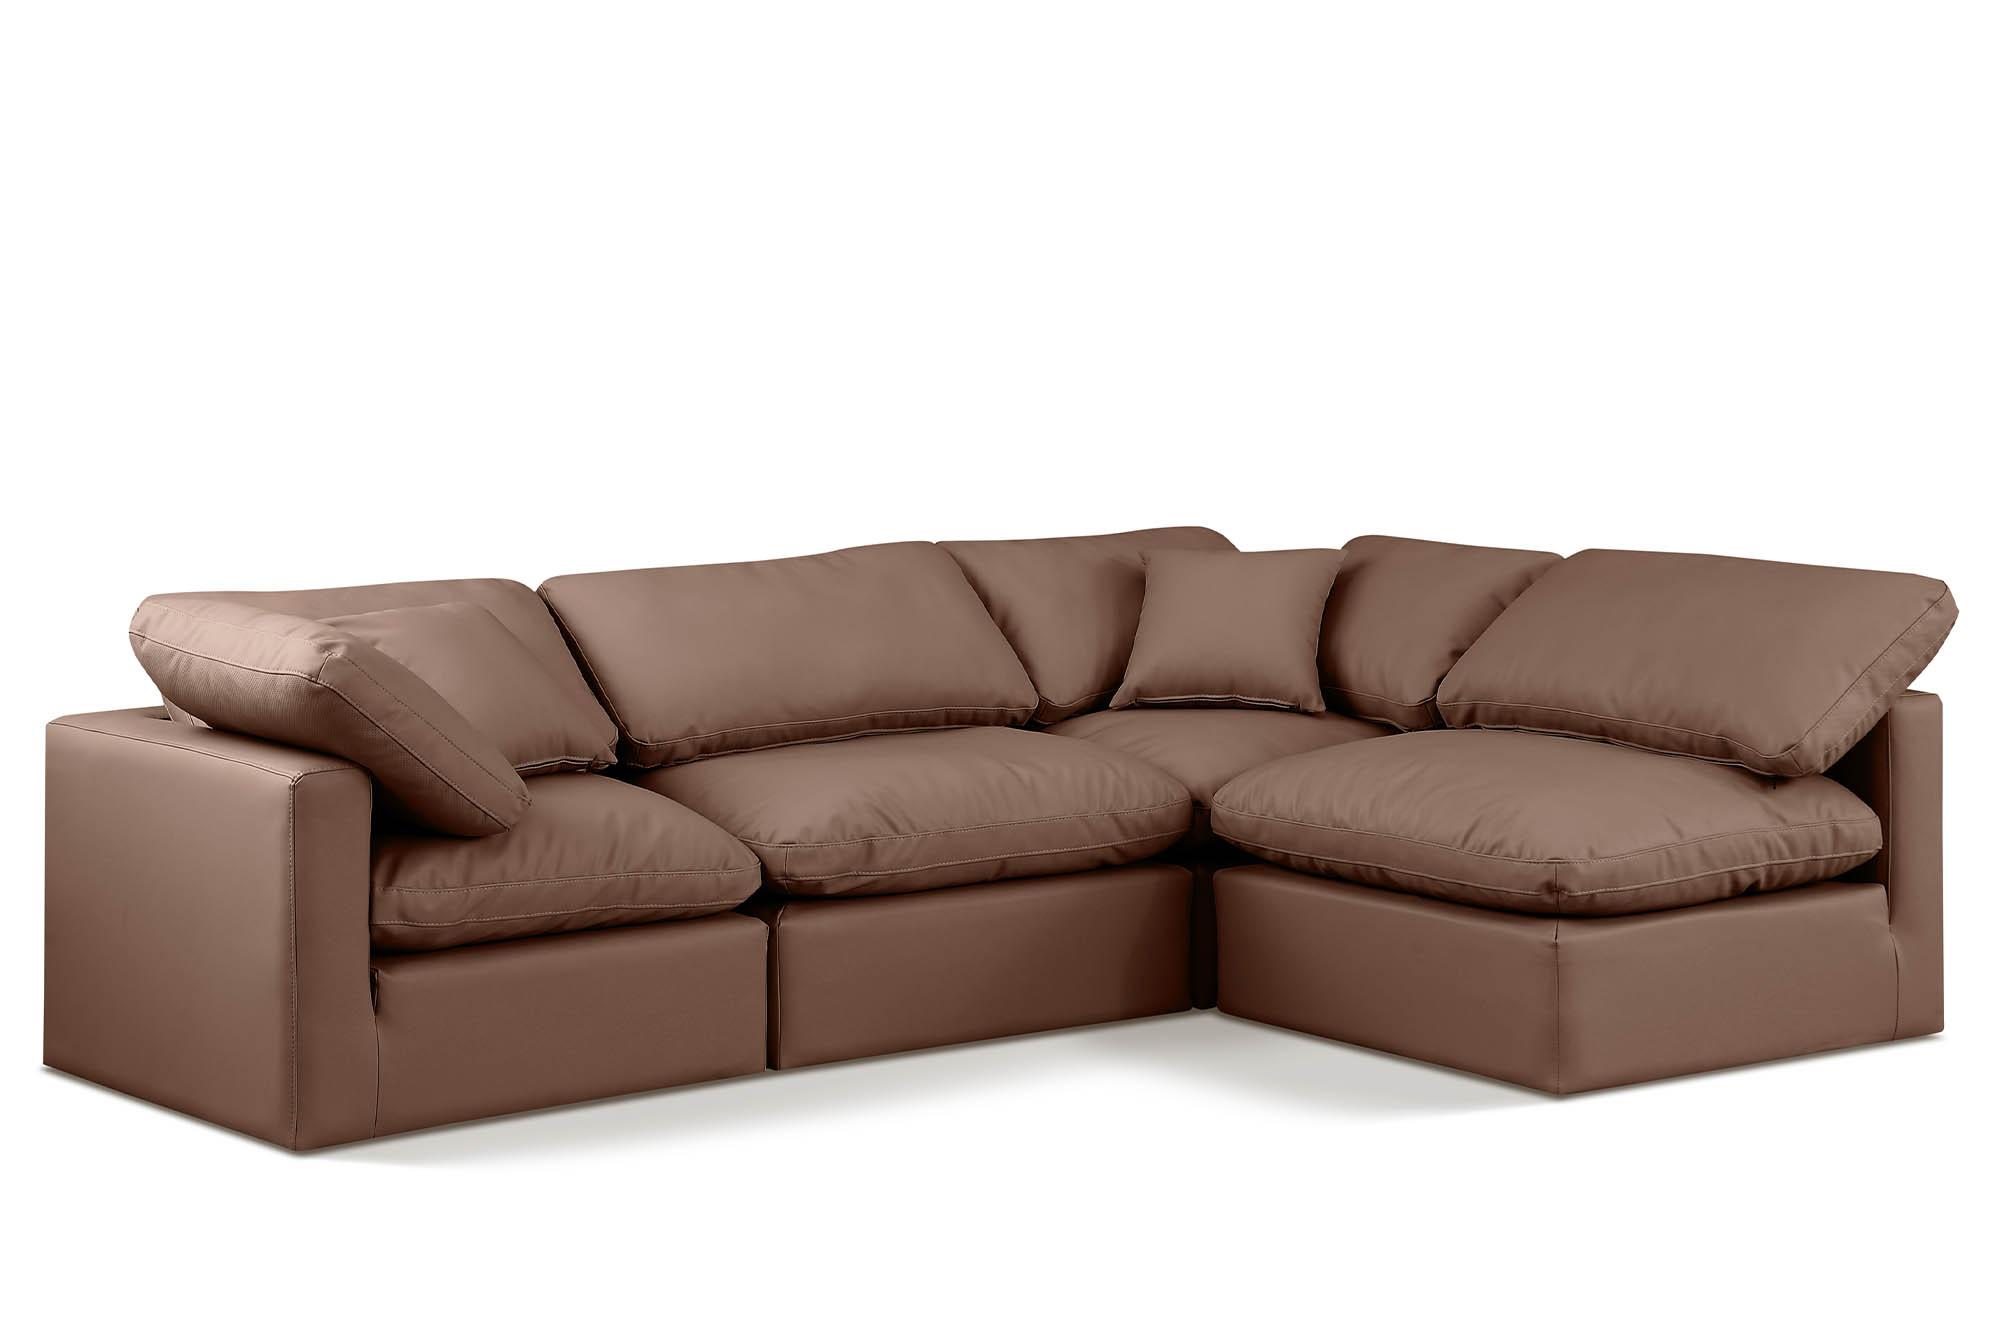 Contemporary, Modern Modular Sectional Sofa INDULGE 146Brown-Sec4B 146Brown-Sec4B in Brown Faux Leather